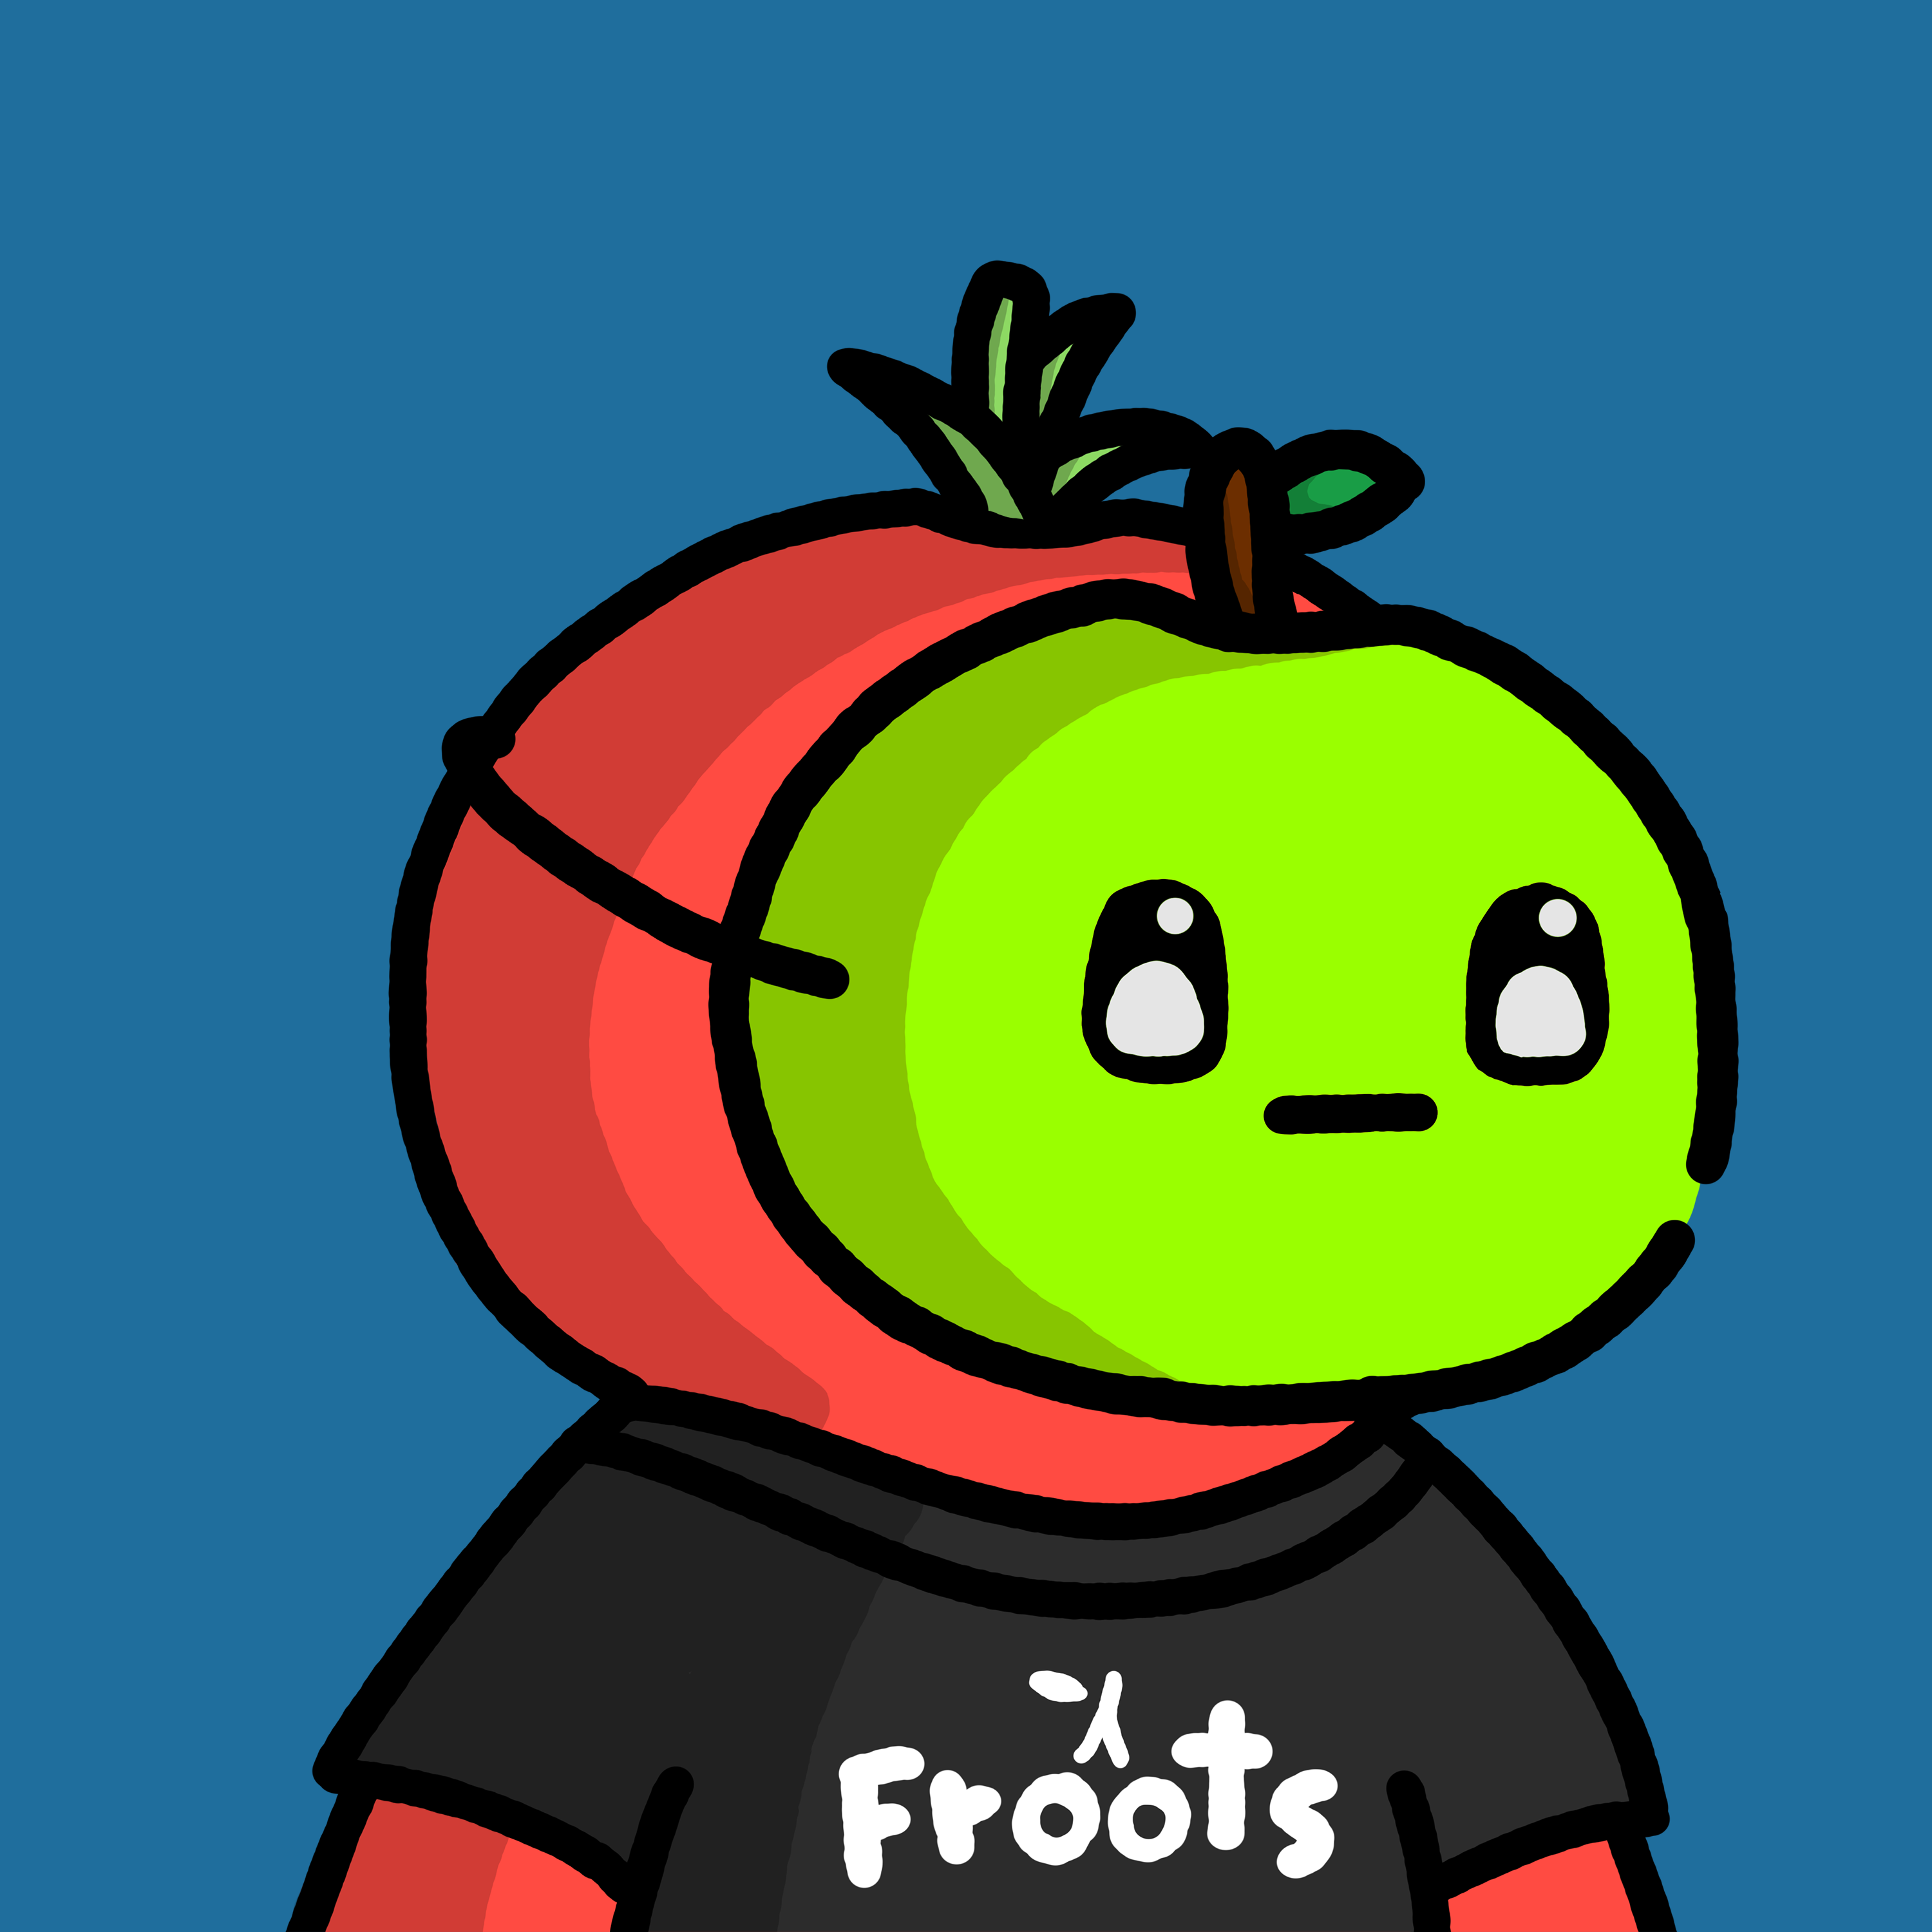 Froots #3284